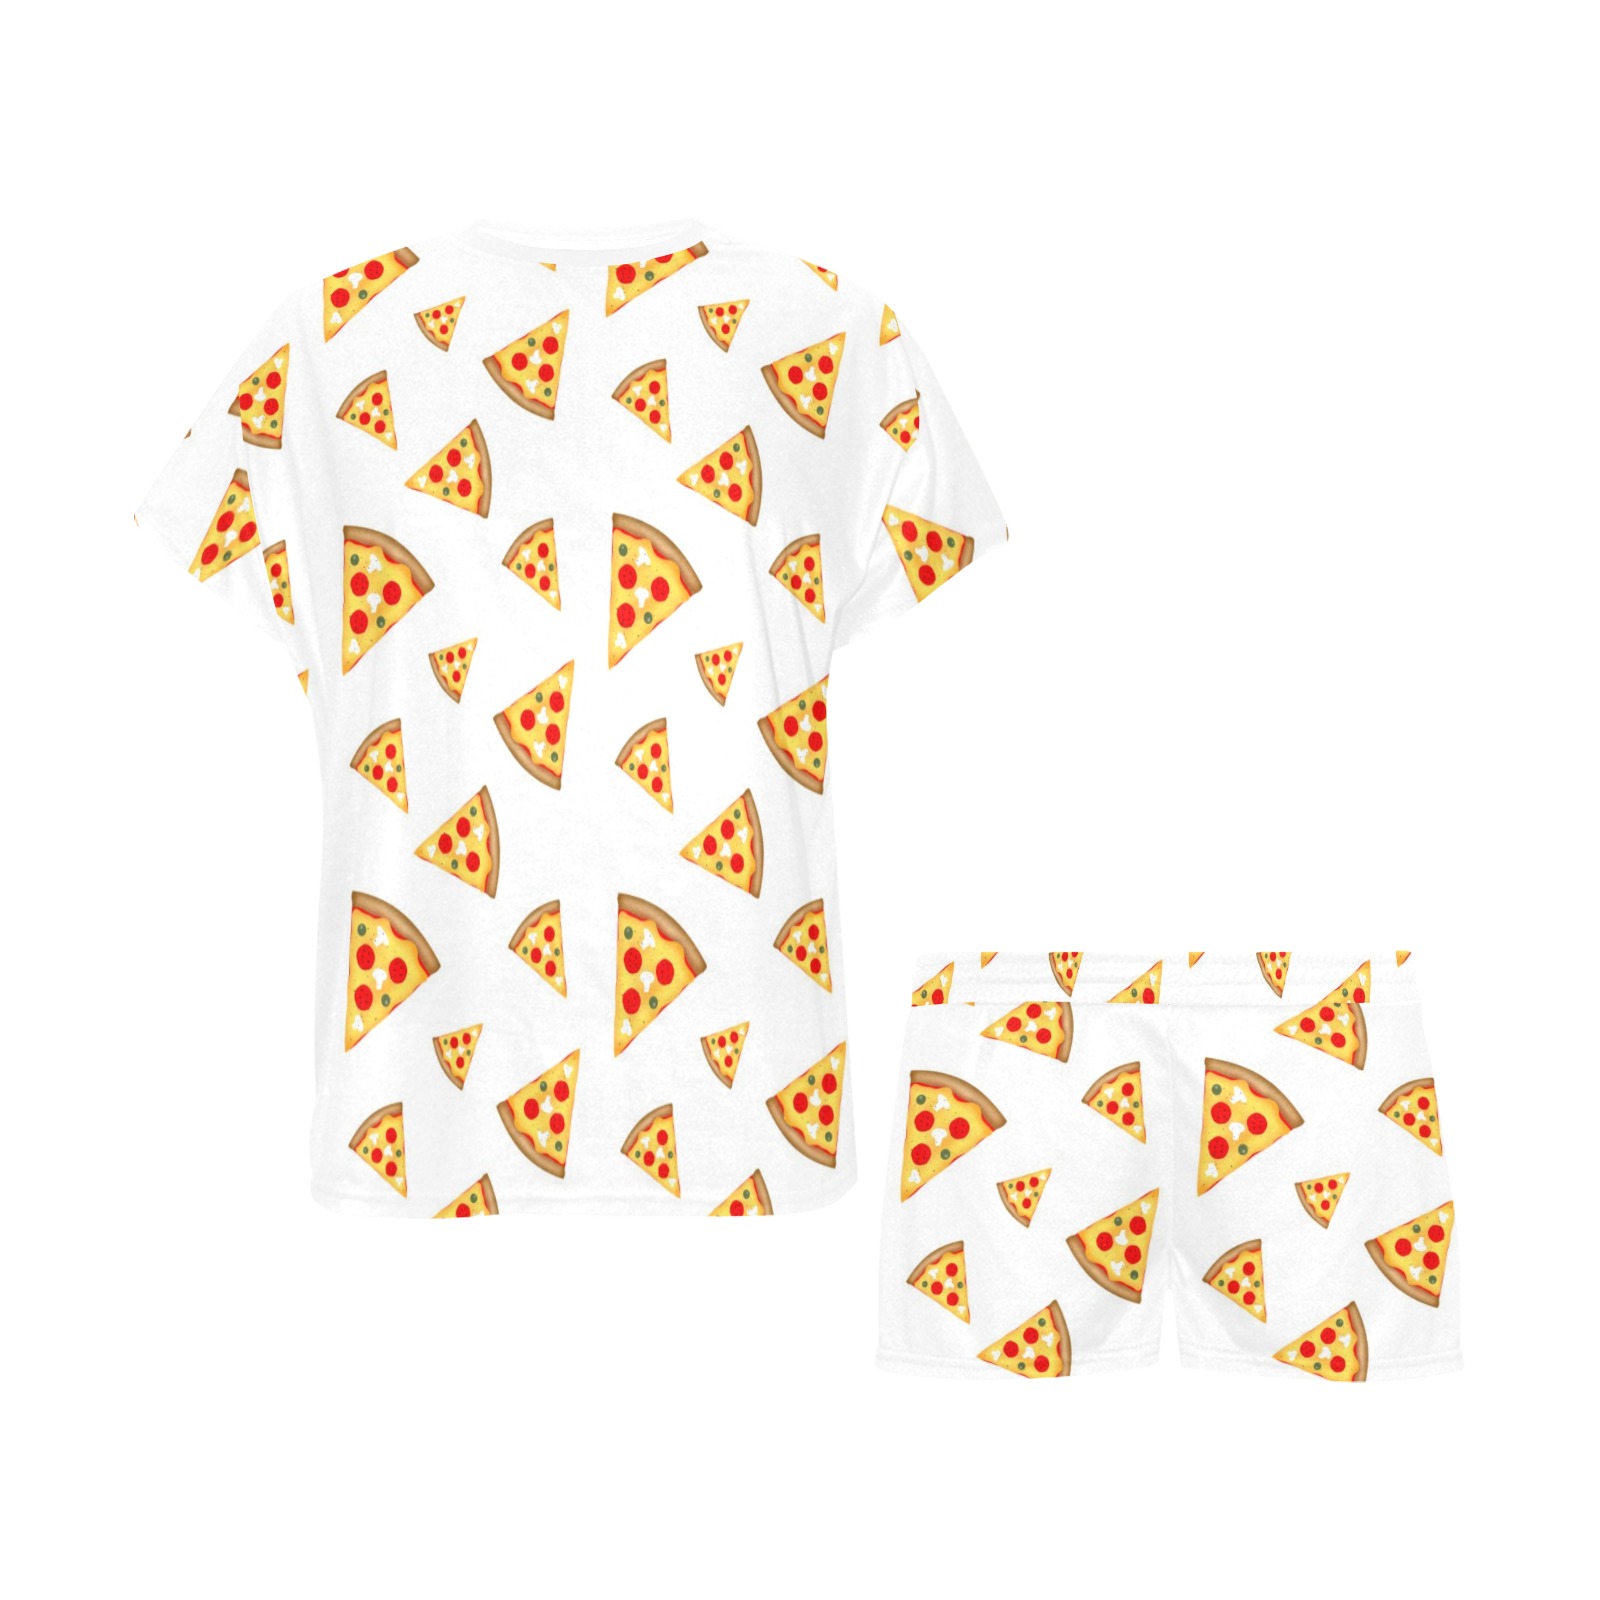 Cool and fun pizza slices pattern on white Women's Short Pajama Set